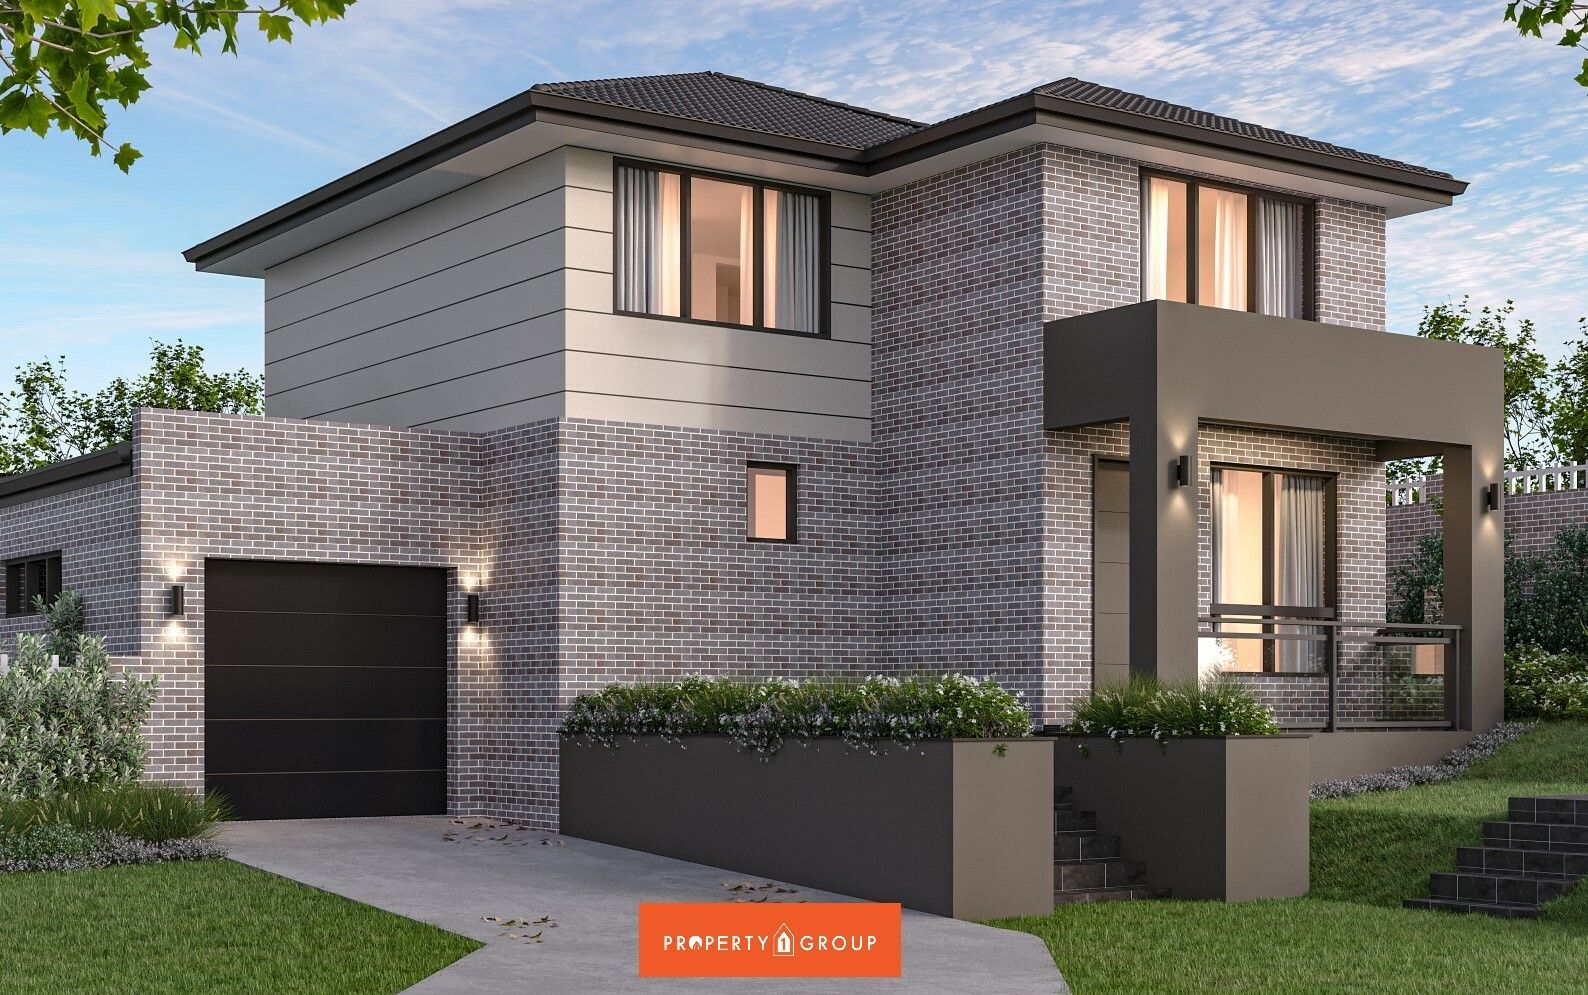 3 bedrooms New House & Land in  KELLYVILLE RIDGE NSW, 2155